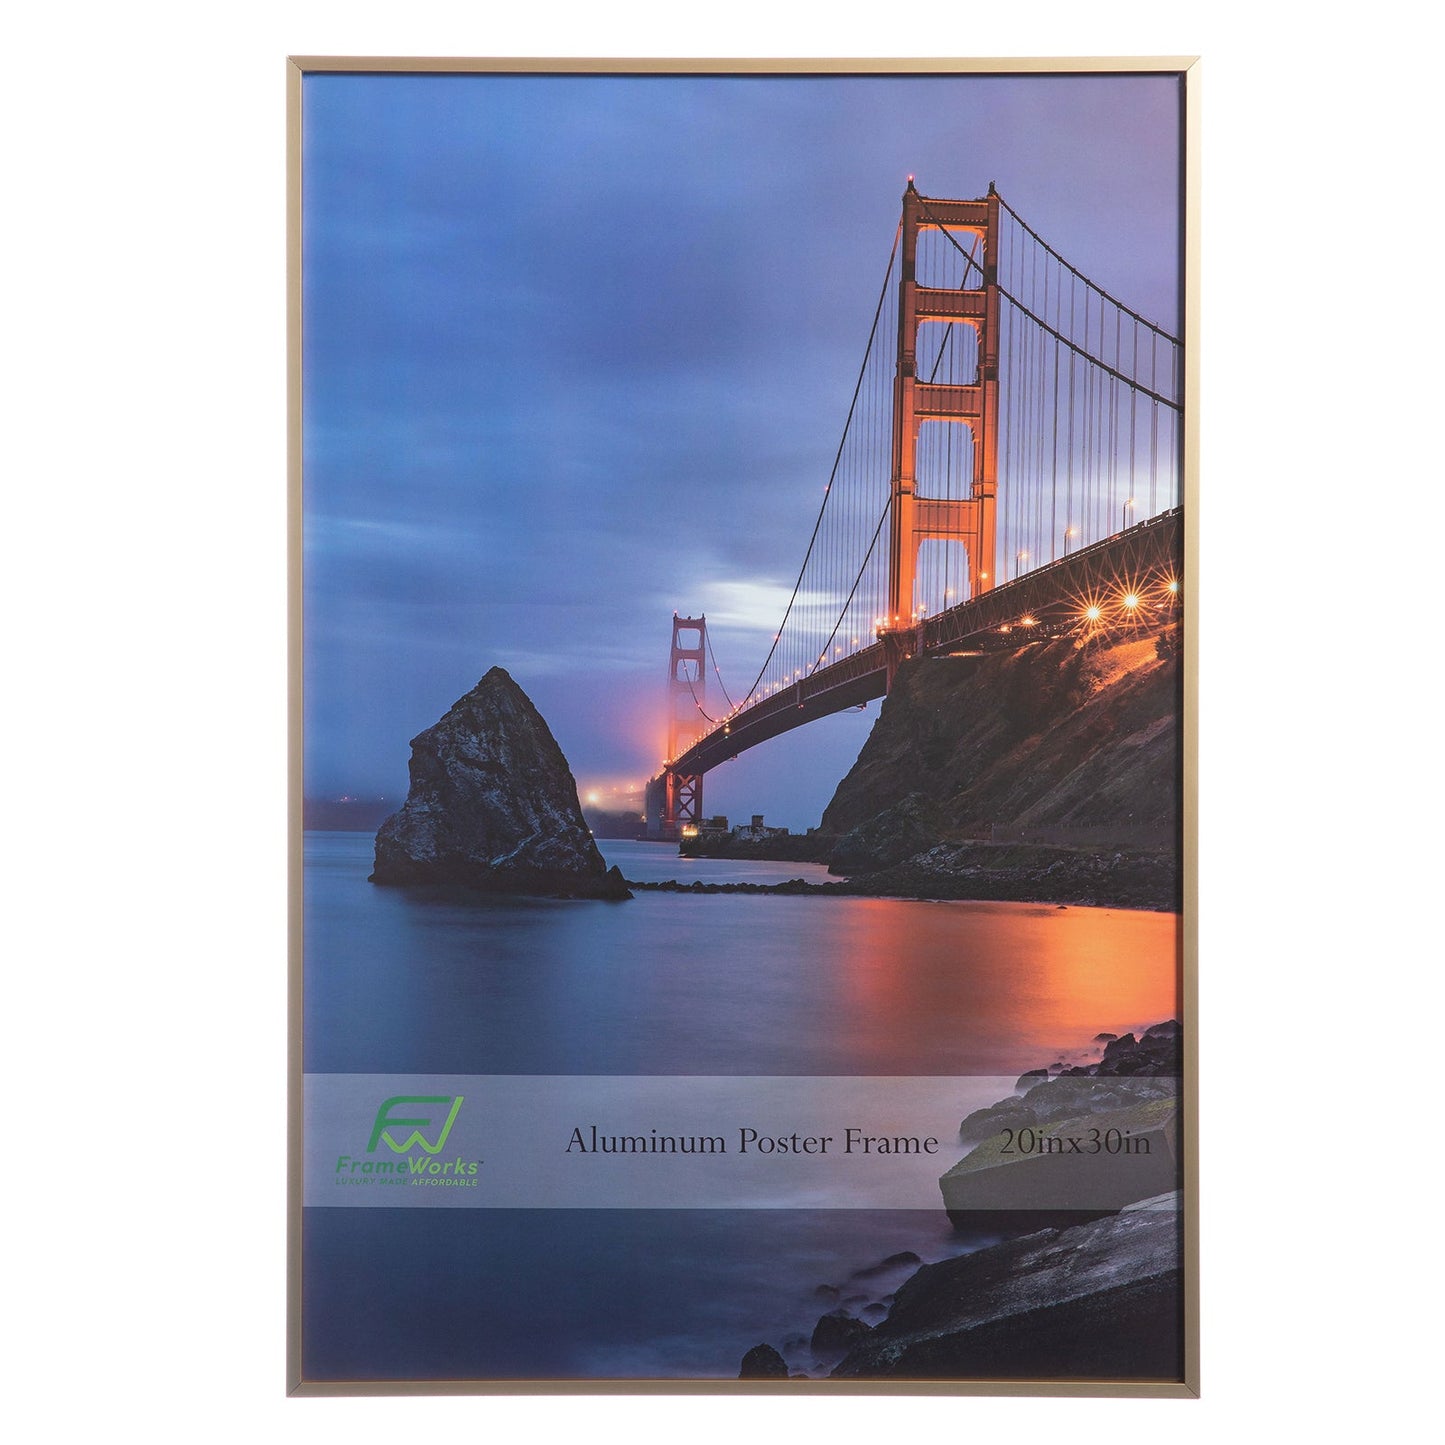 20" x 30" Gold Brushed Aluminum Poster Picture Frame with Plexiglass